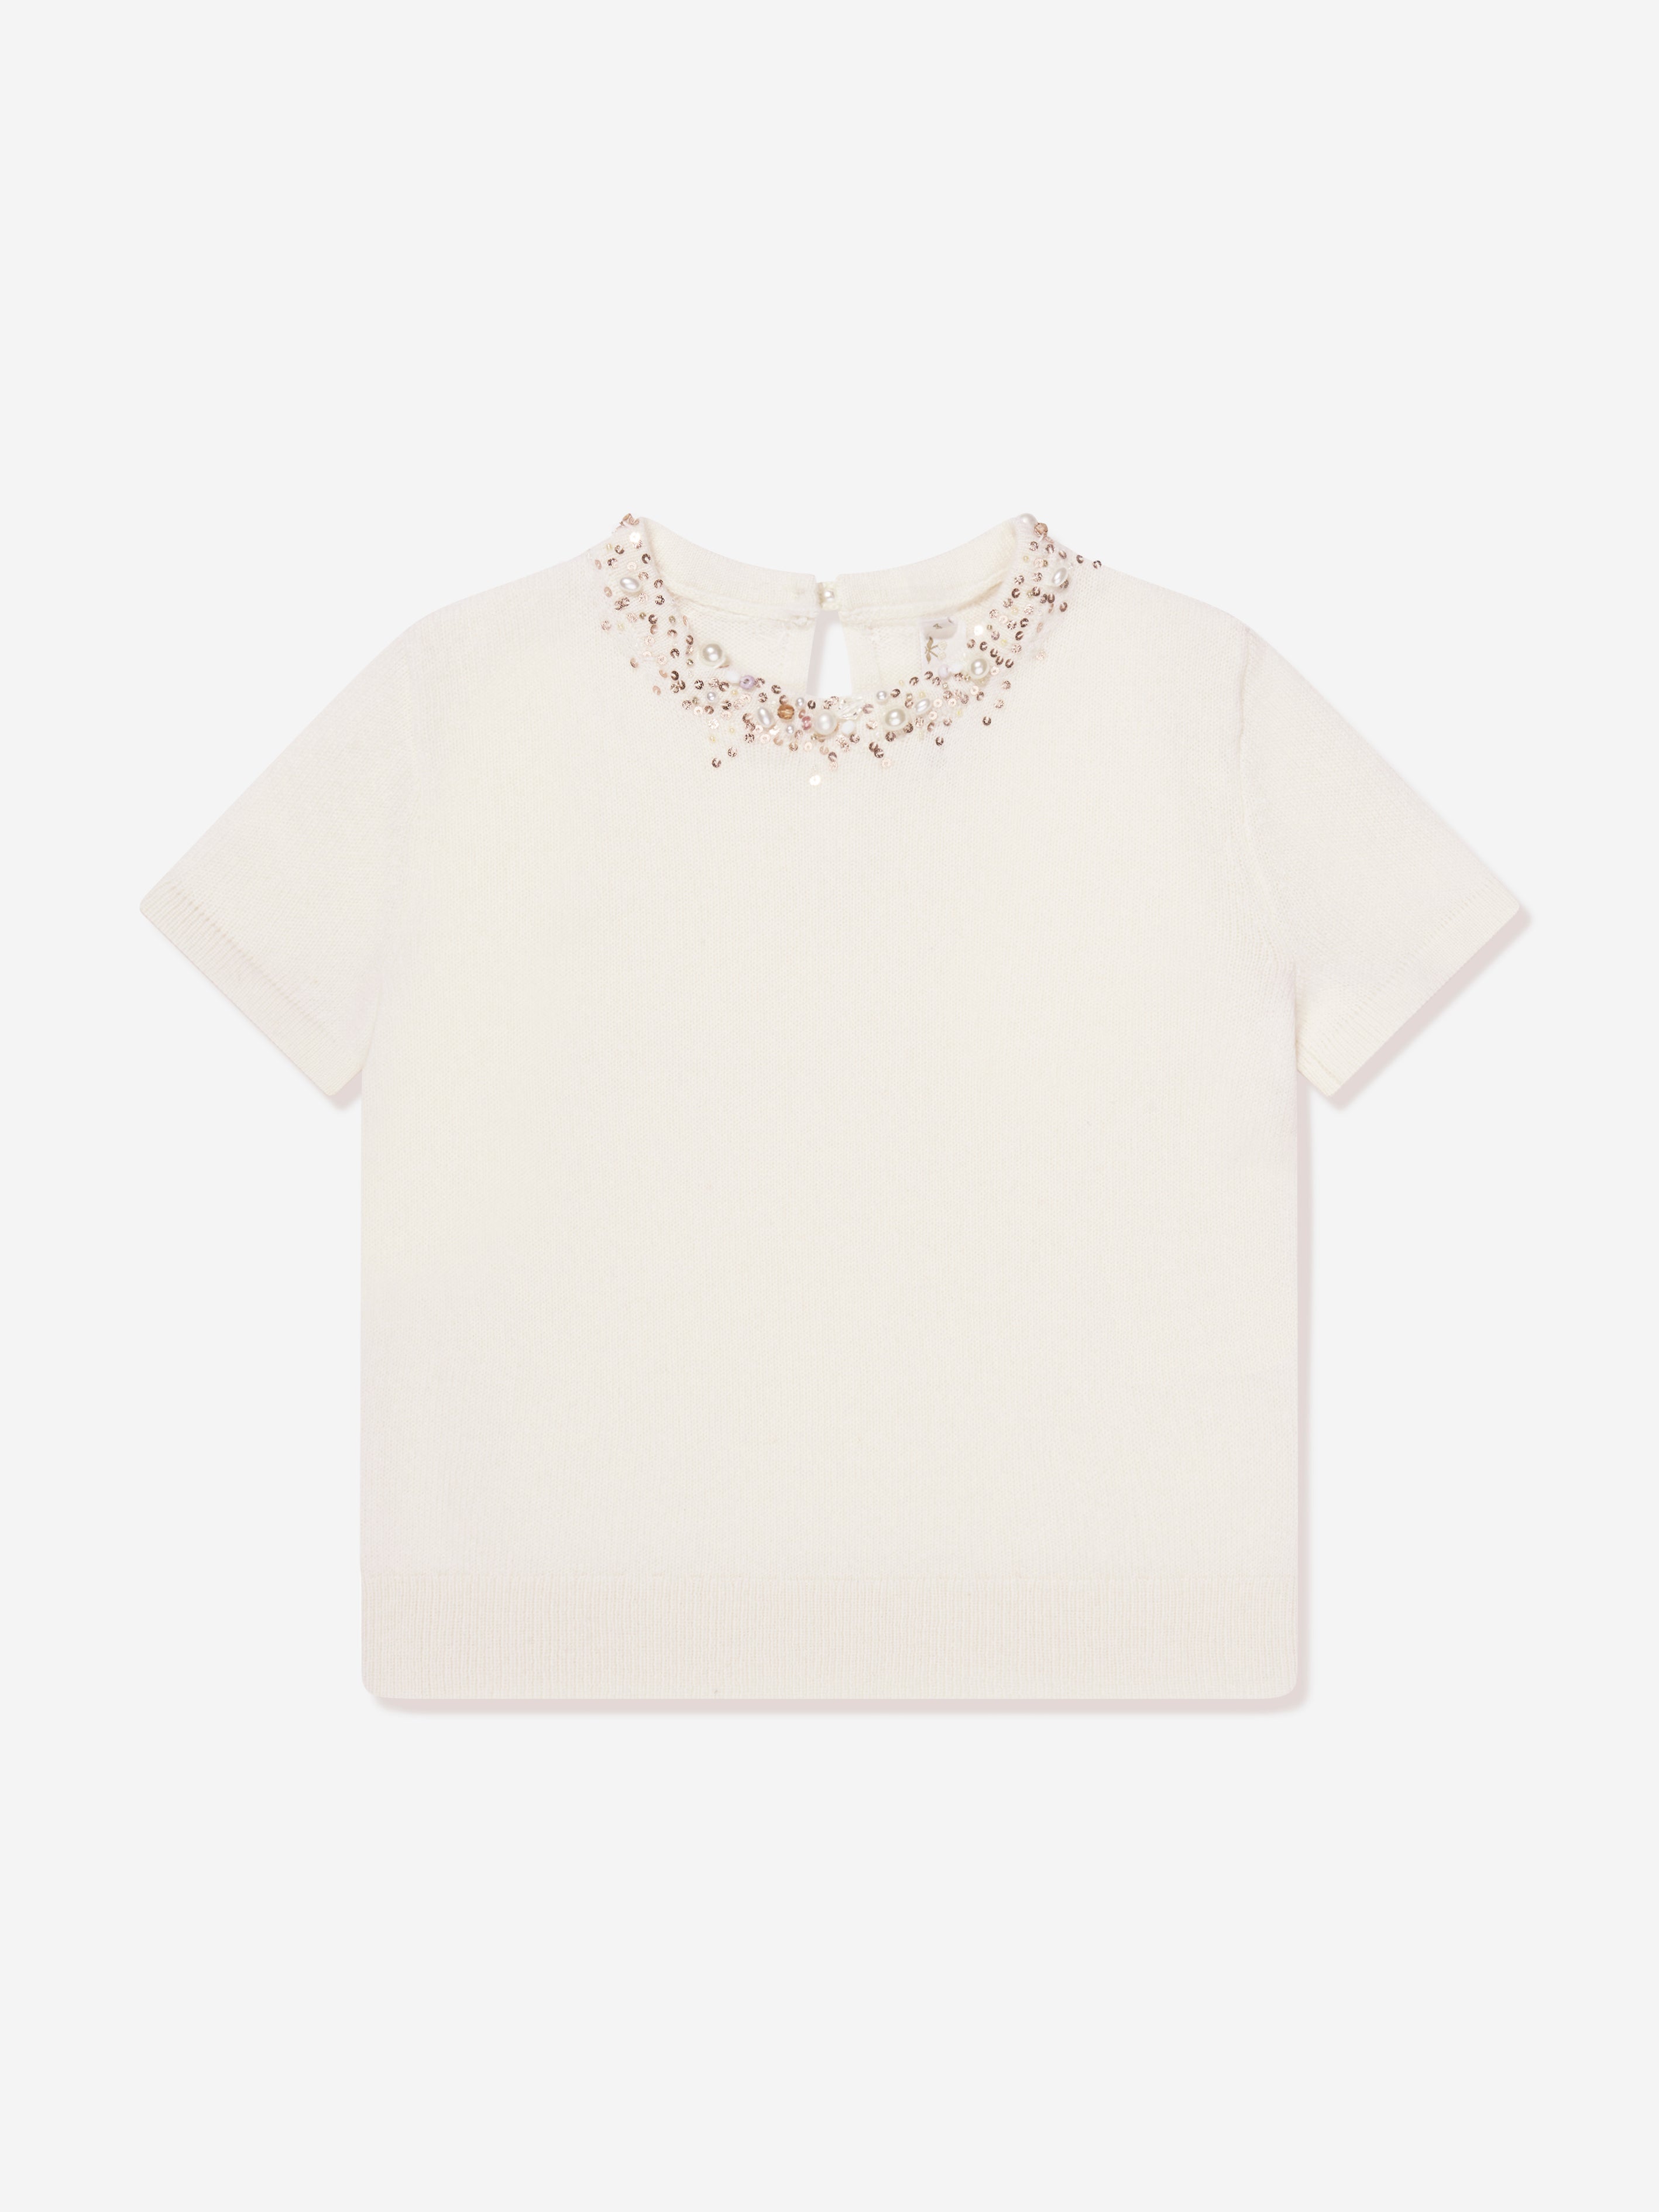 Bonpoint Babies' Girls Diaphane Cashmere Top In White